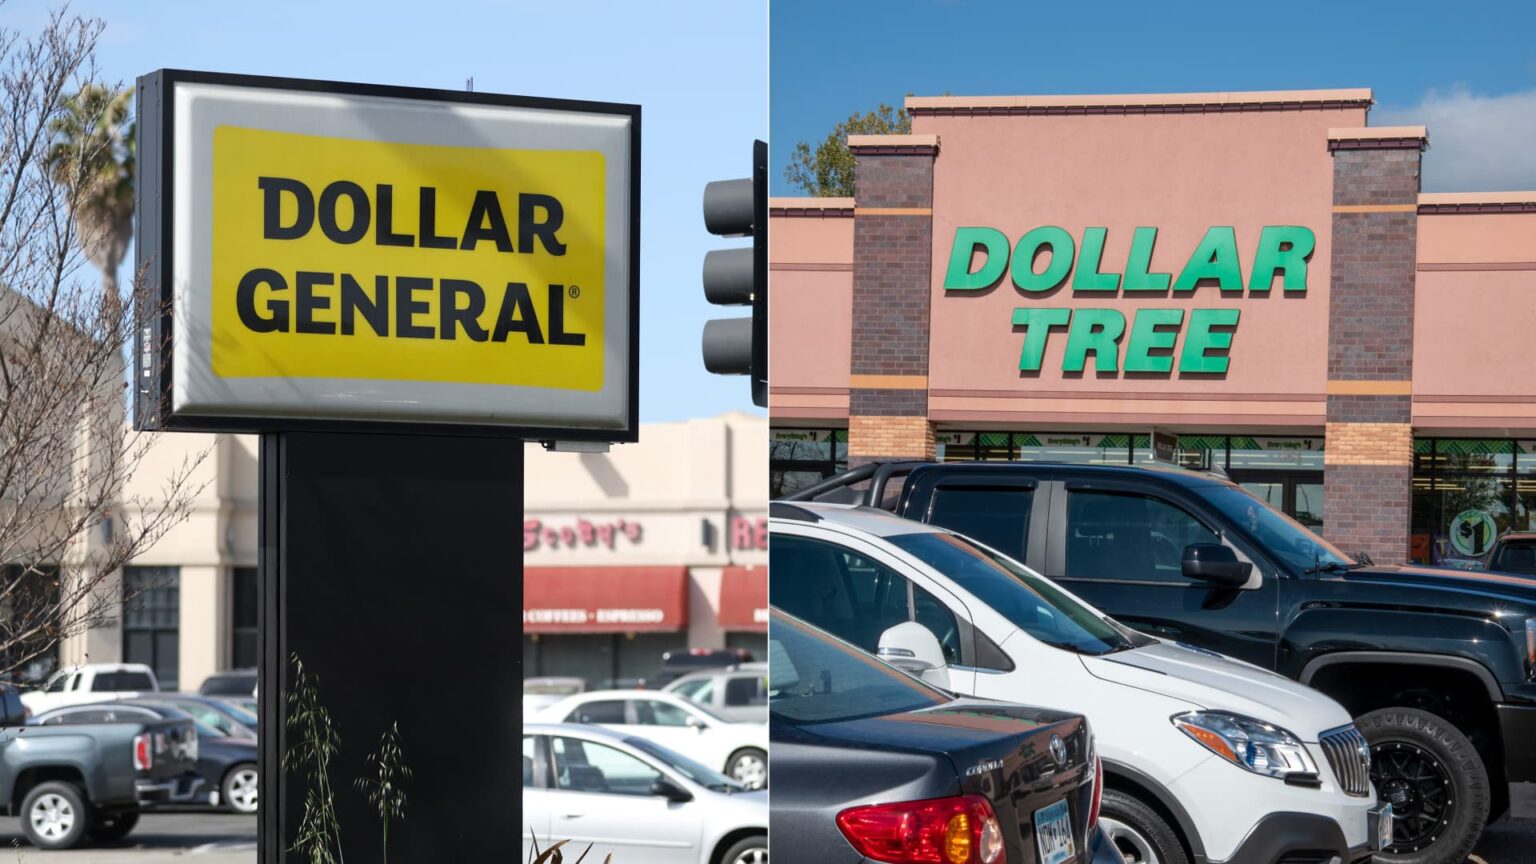 Dollar General, Dollar Tree pushed to improve worker safety, wages